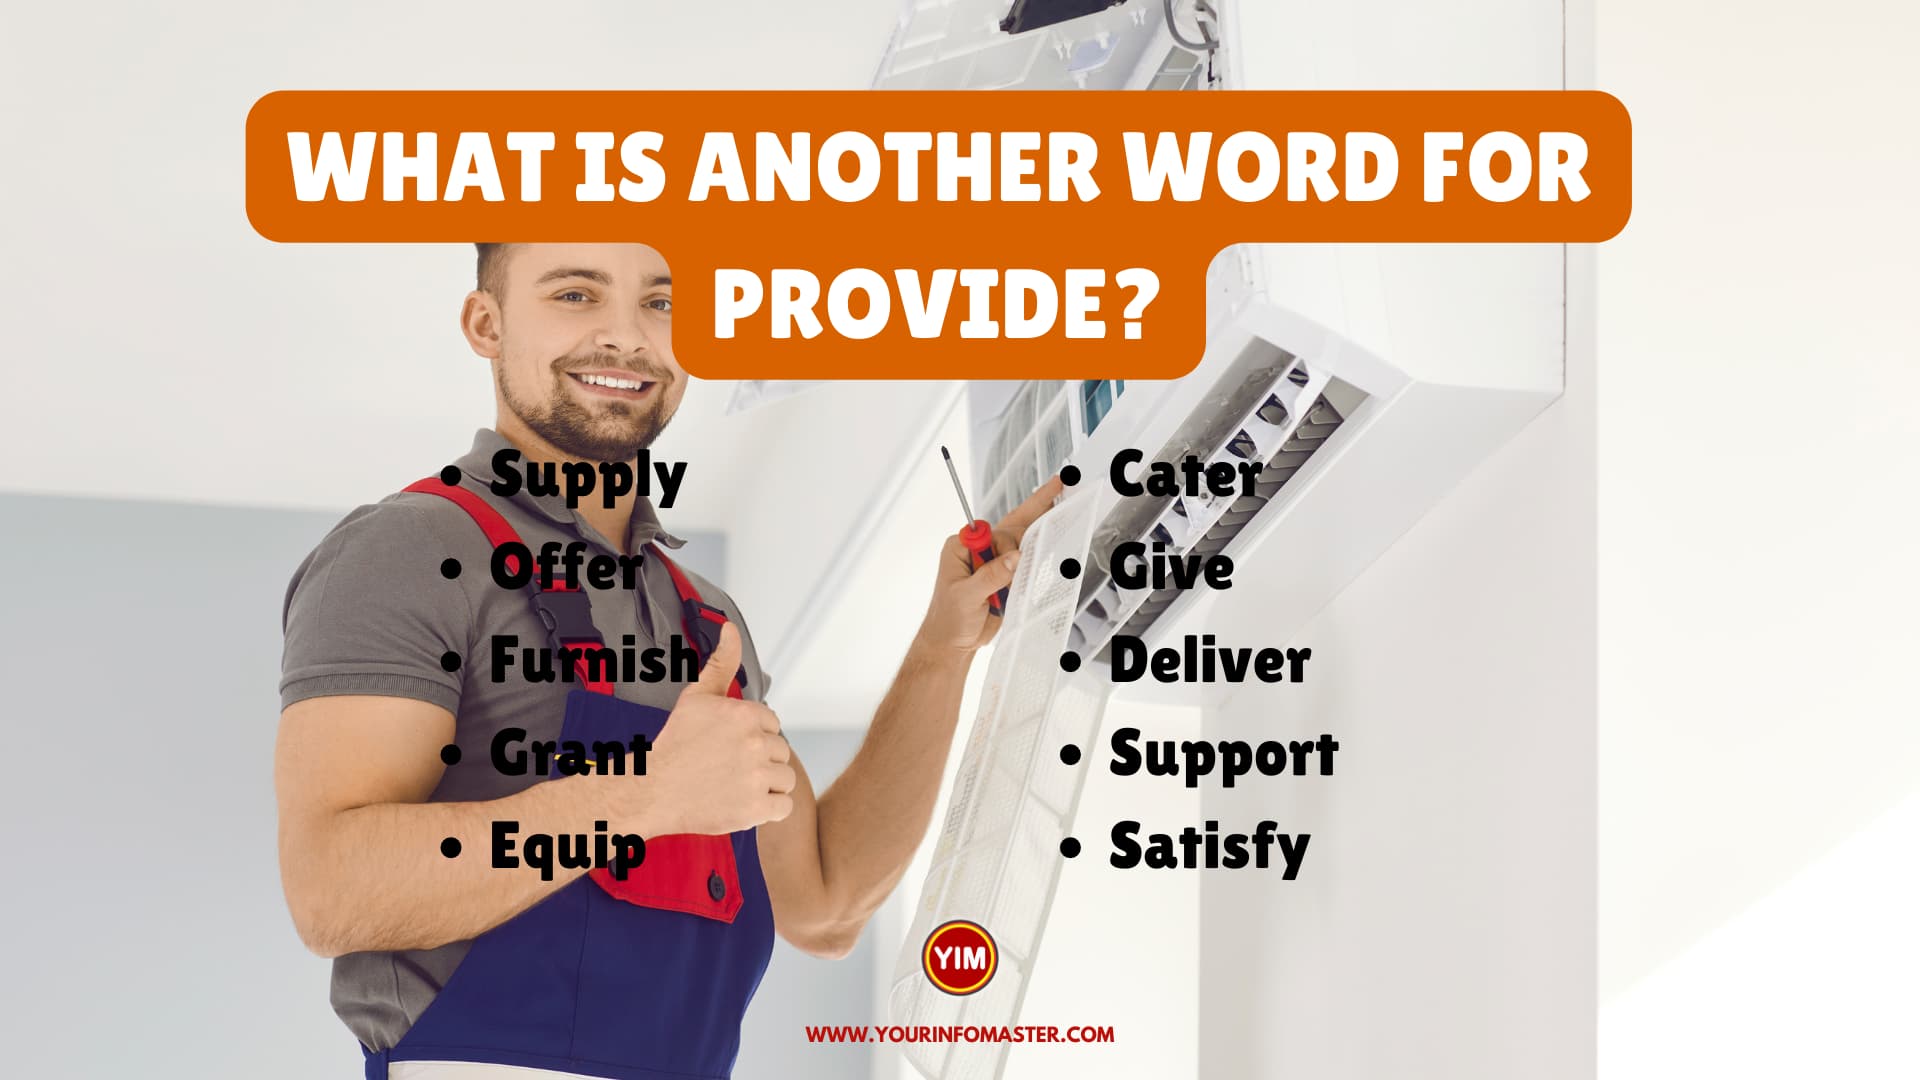 What is another word for Provide